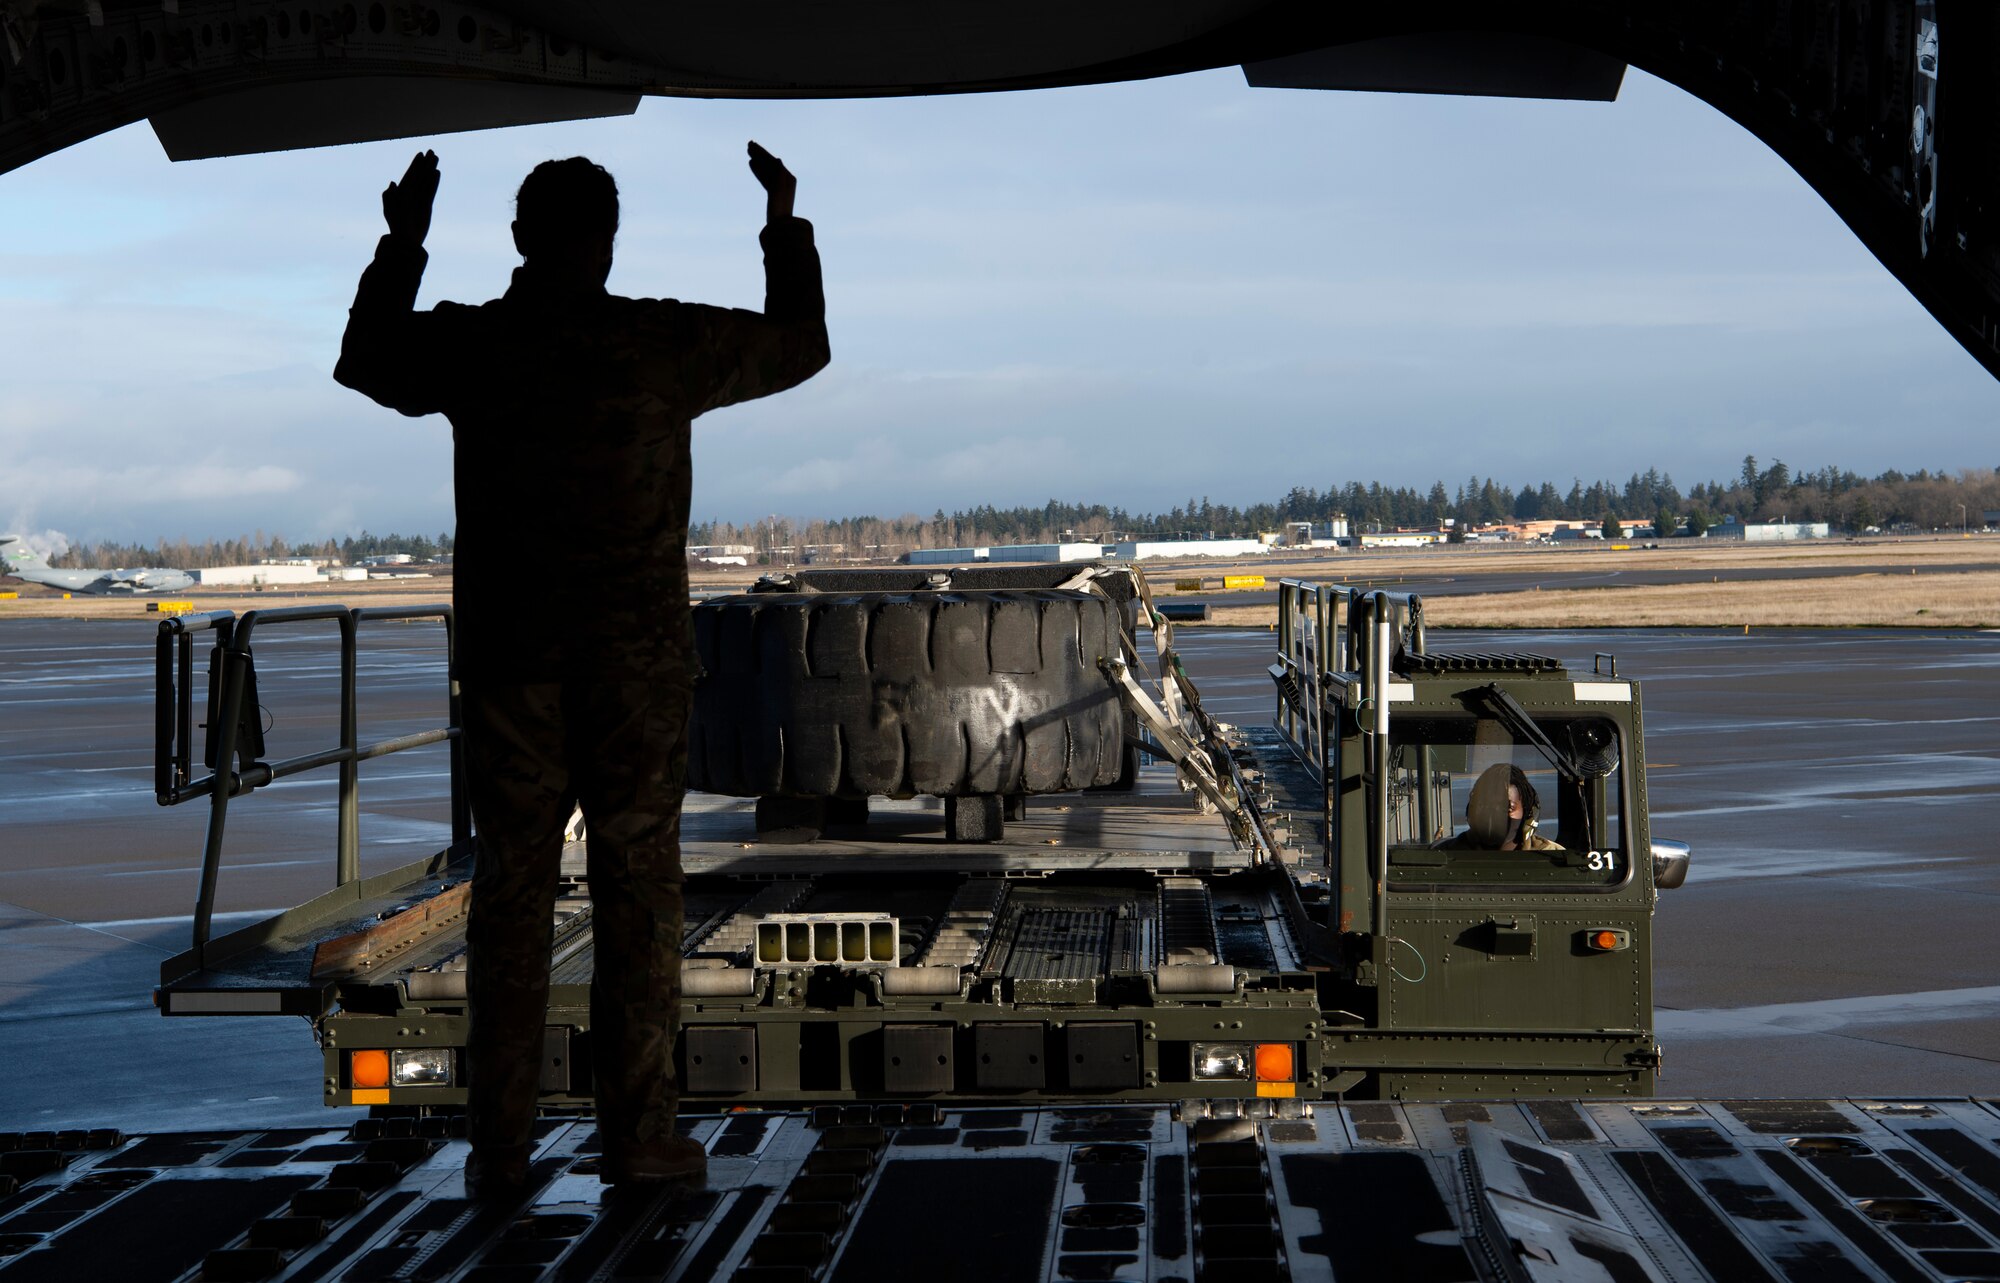 U.S. Air Force Tech. Sgt. Jaideep Kaur, 7th Airlift Squadron Operations flight chief, marshals a 62nd Aerial Port Squadron vehicle toward the ramp of a C-17 Globemaster III at Joint Base Lewis-McChord, Washington, Dec. 14, 2020. Kaur and other Team McChord Airmen participated in an all-female training mission to honor women in the Air Force. (U.S. Air Force photo by Senior Airman Tryphena Mayhugh)